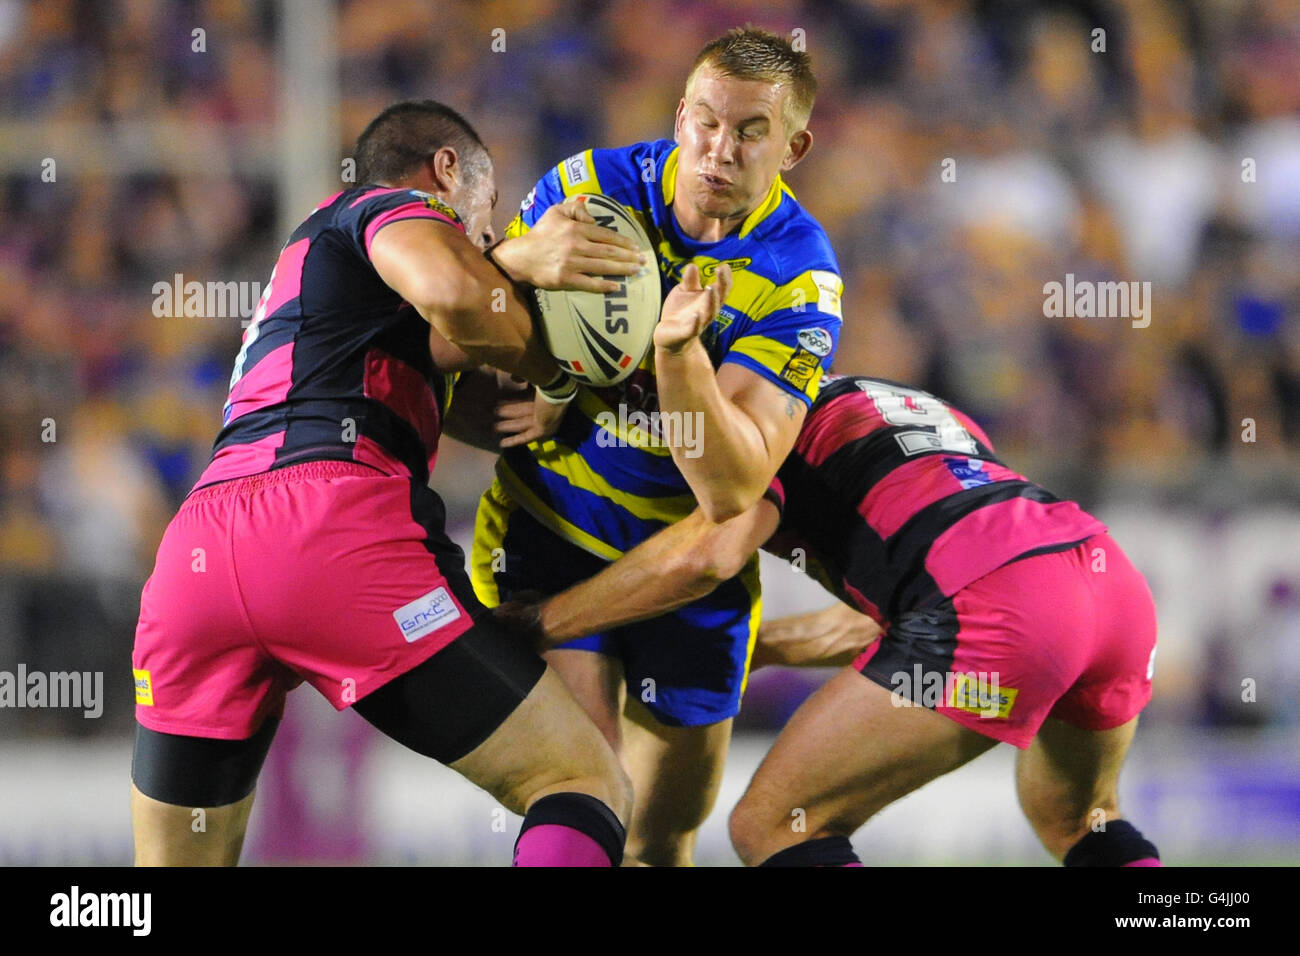 Warrington Wolves' Mike Cooper is tackled by Leeds Rhinos' Ian Kirke and Danny Buderus during the engage Super League, Semi Final match at the Halliwell Jones Stadium, Warrington. Stock Photo